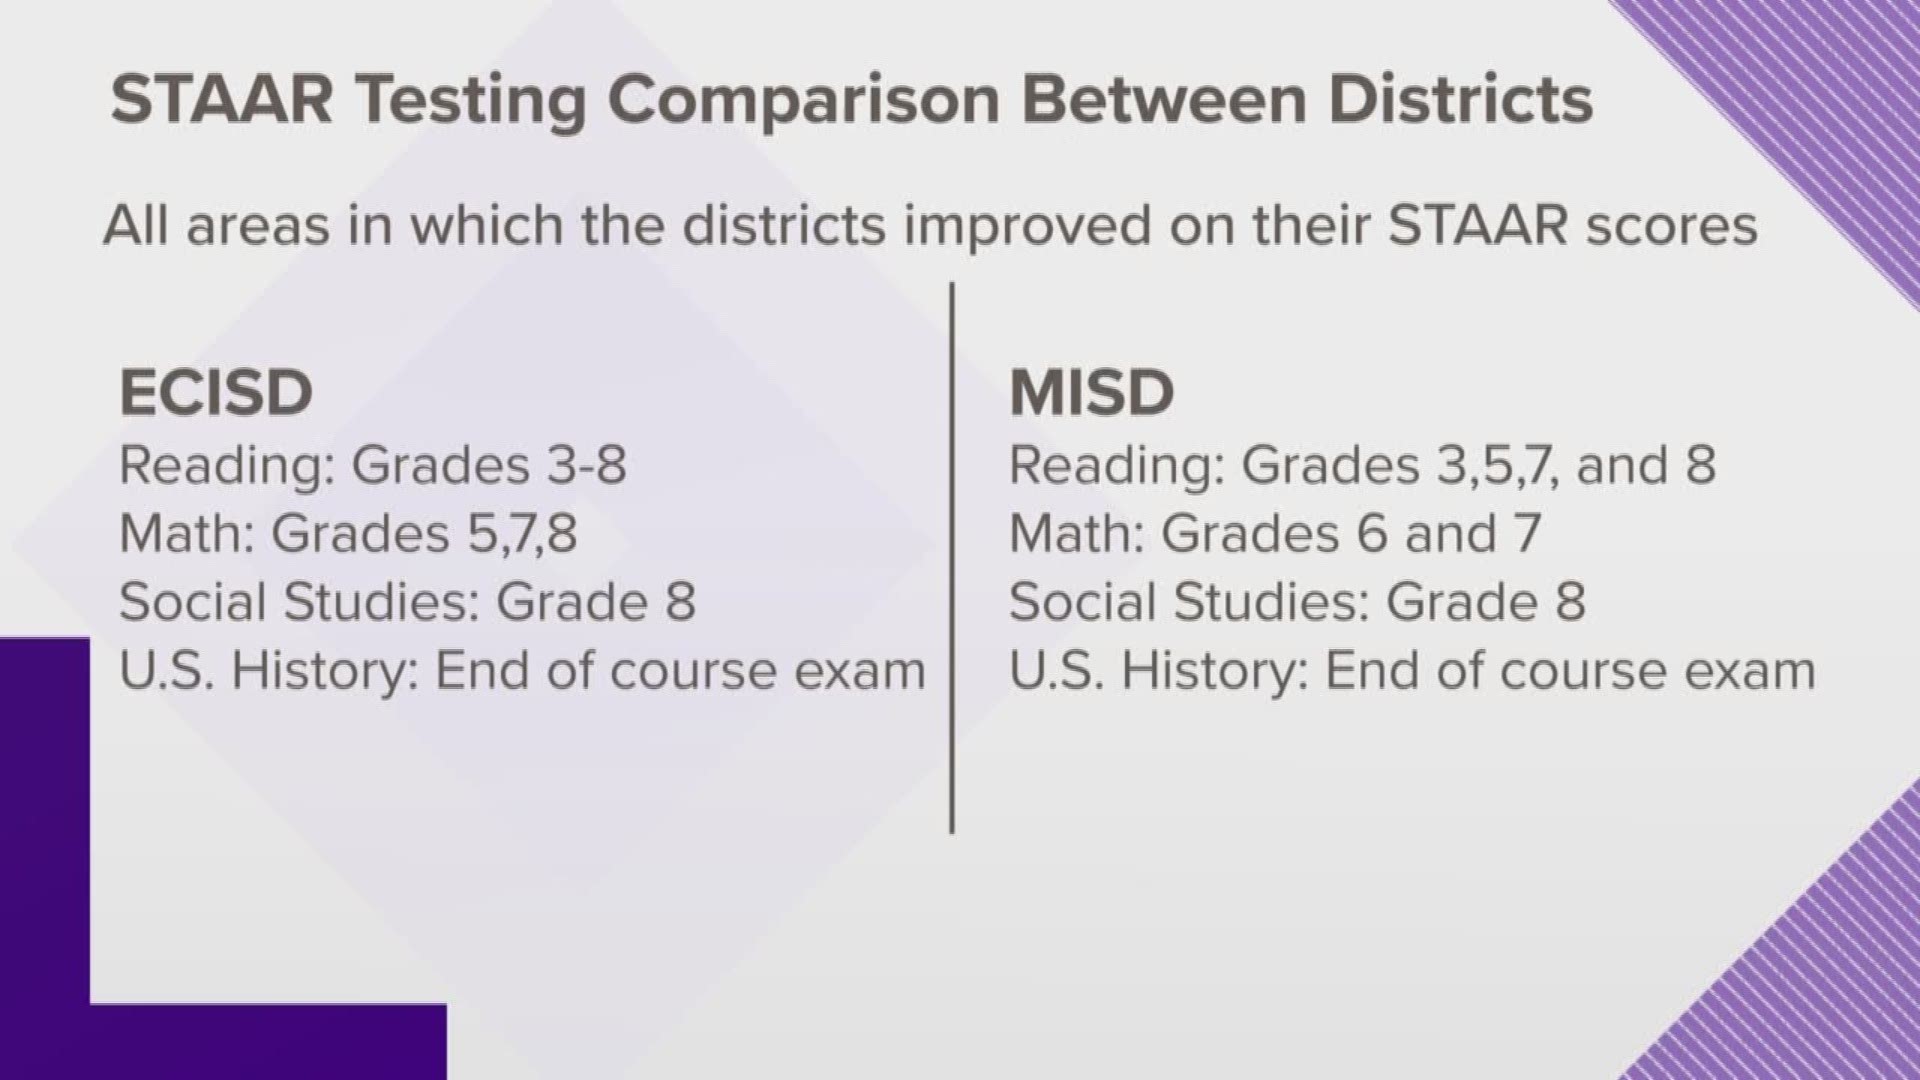 Multiple grades in both cities saw increases in reading, math, social studies and more.